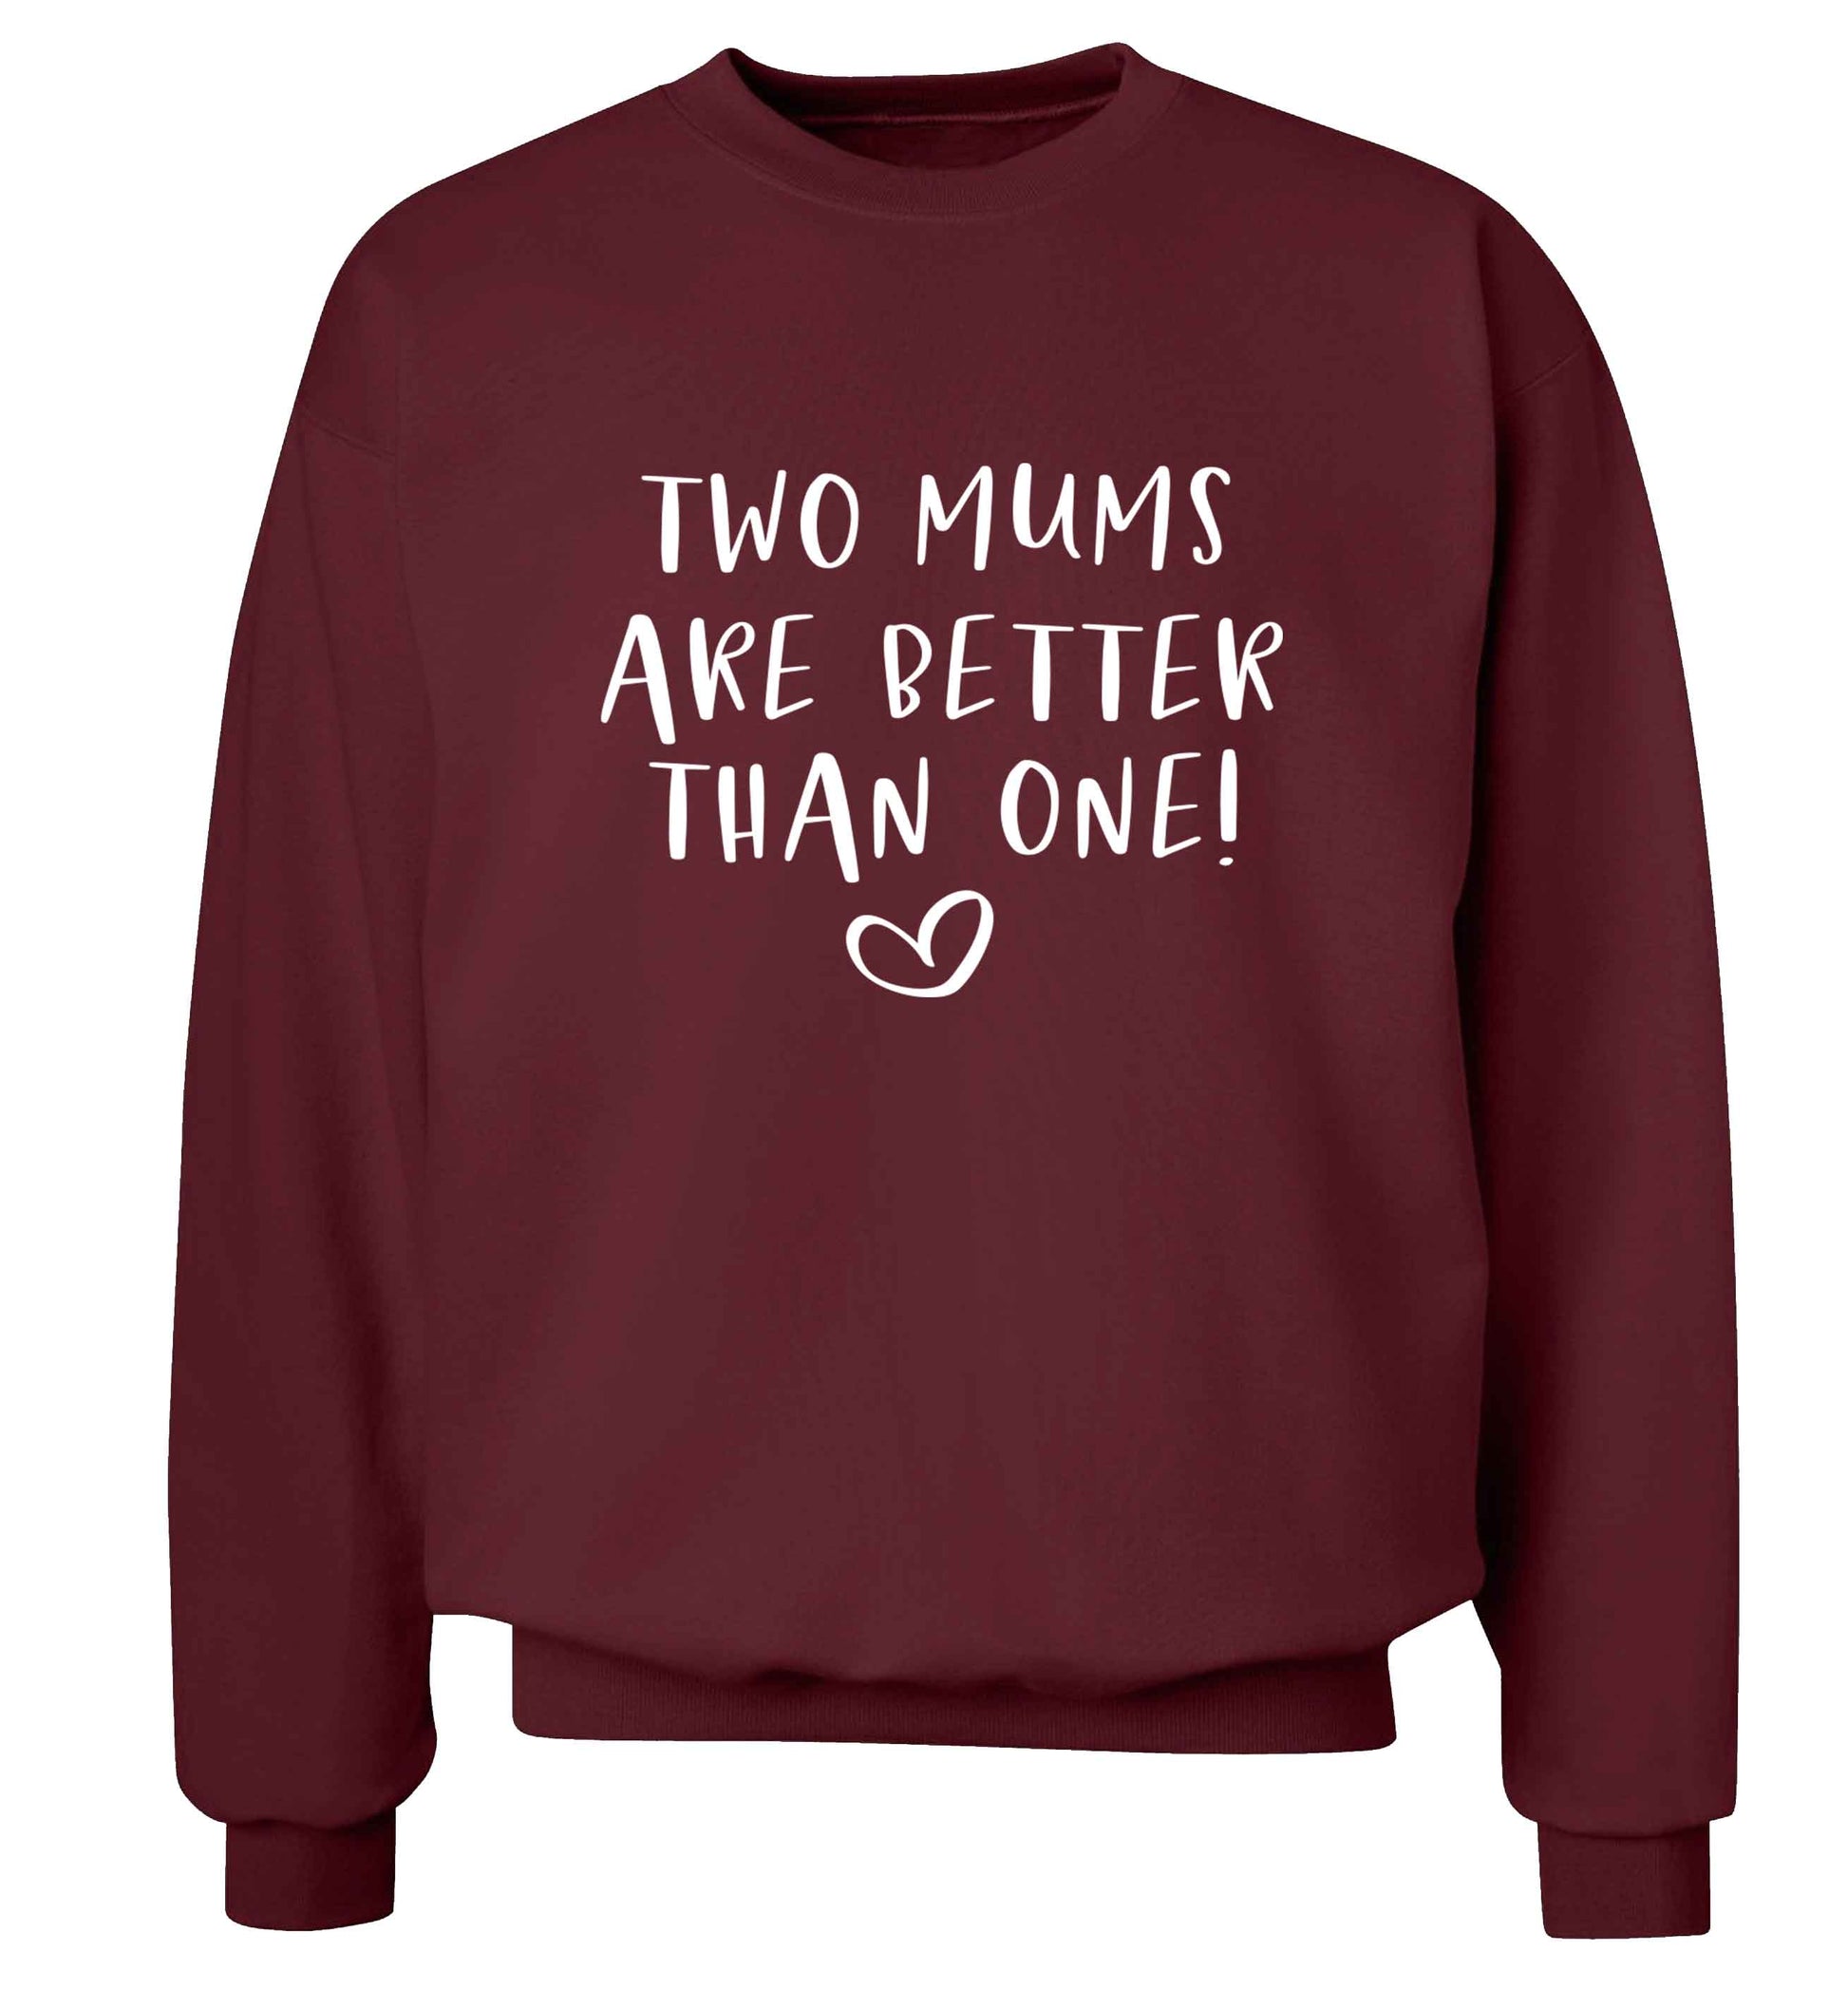 Two mums are better than one adult's unisex maroon sweater 2XL